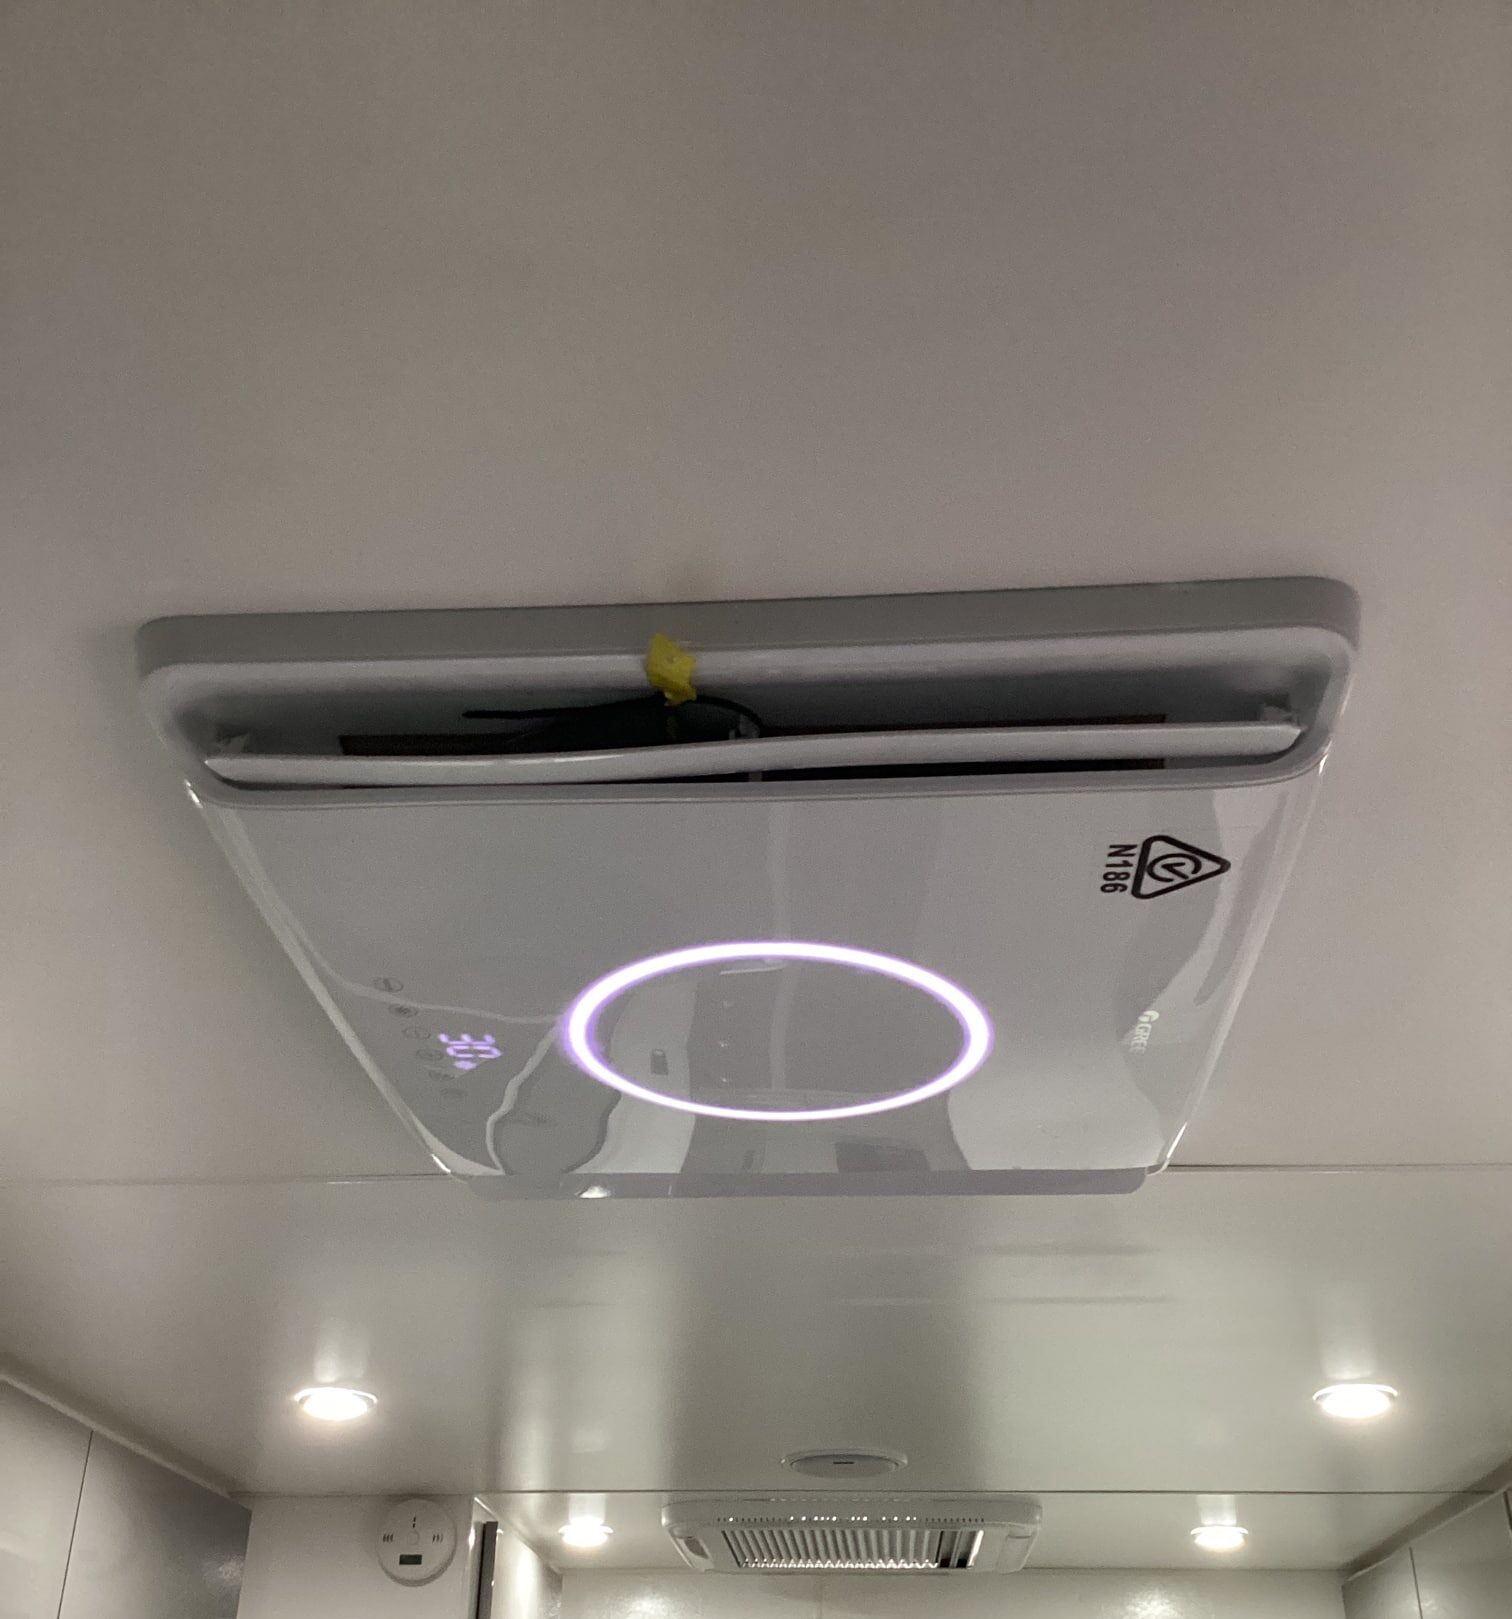 Close-up view of the caravan air conditioner unit, highlighting its design and features